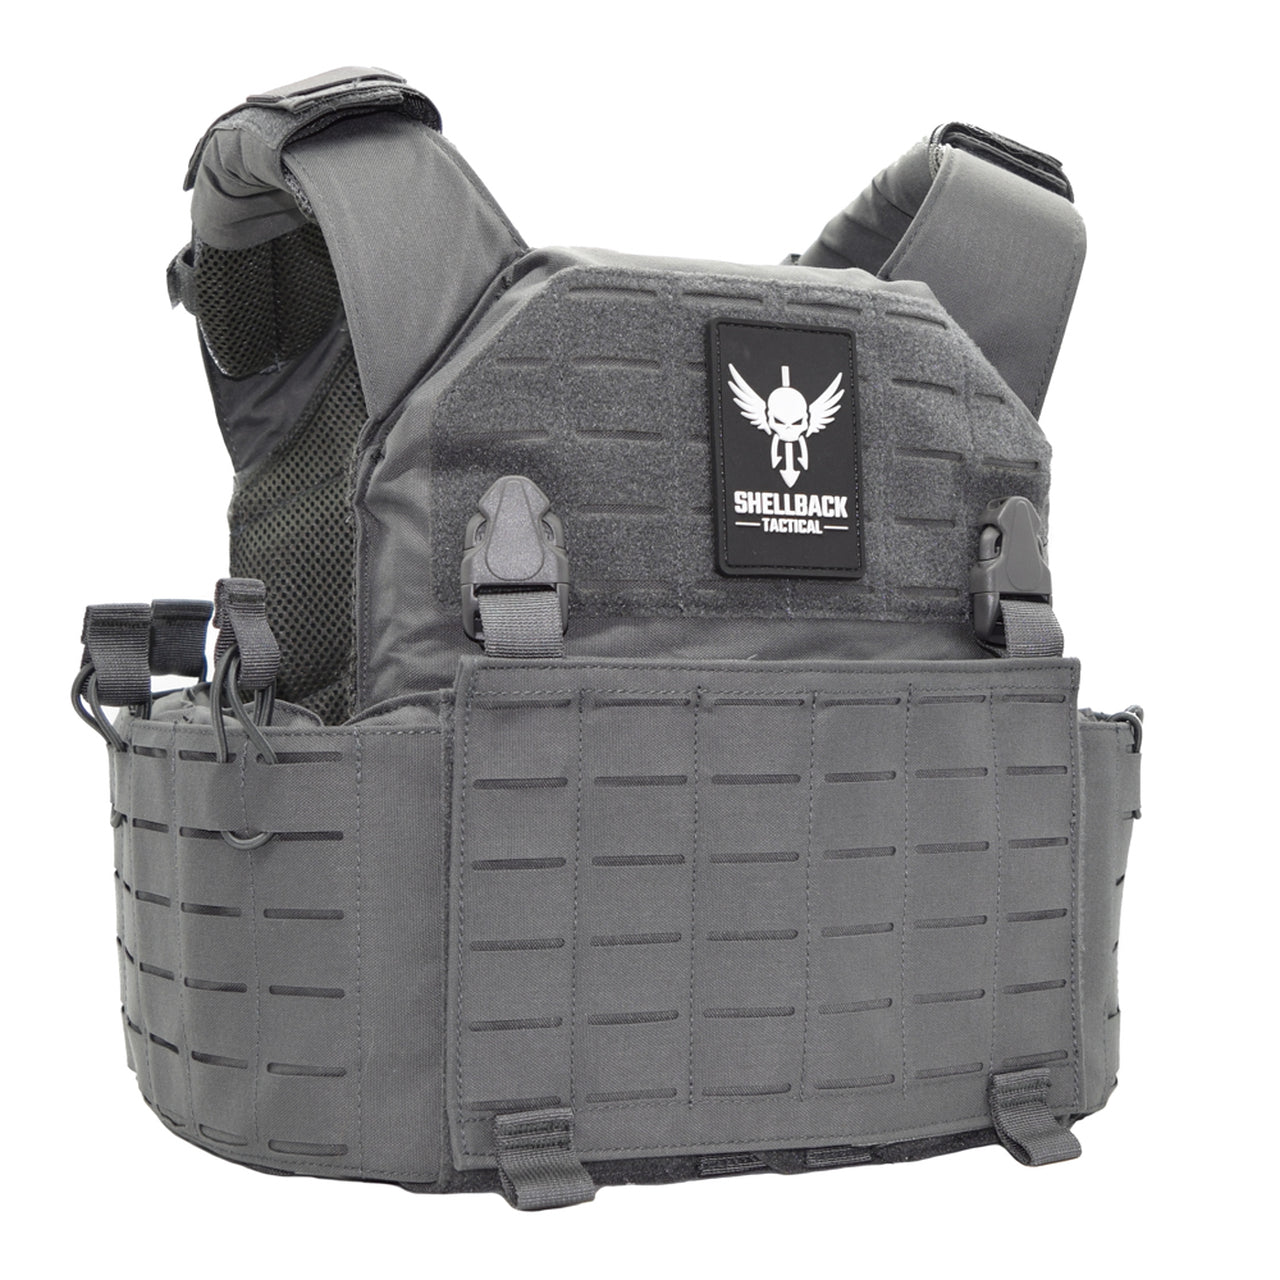 A Shellback Tactical Rampage 2.0 Plate Carrier on a white background.